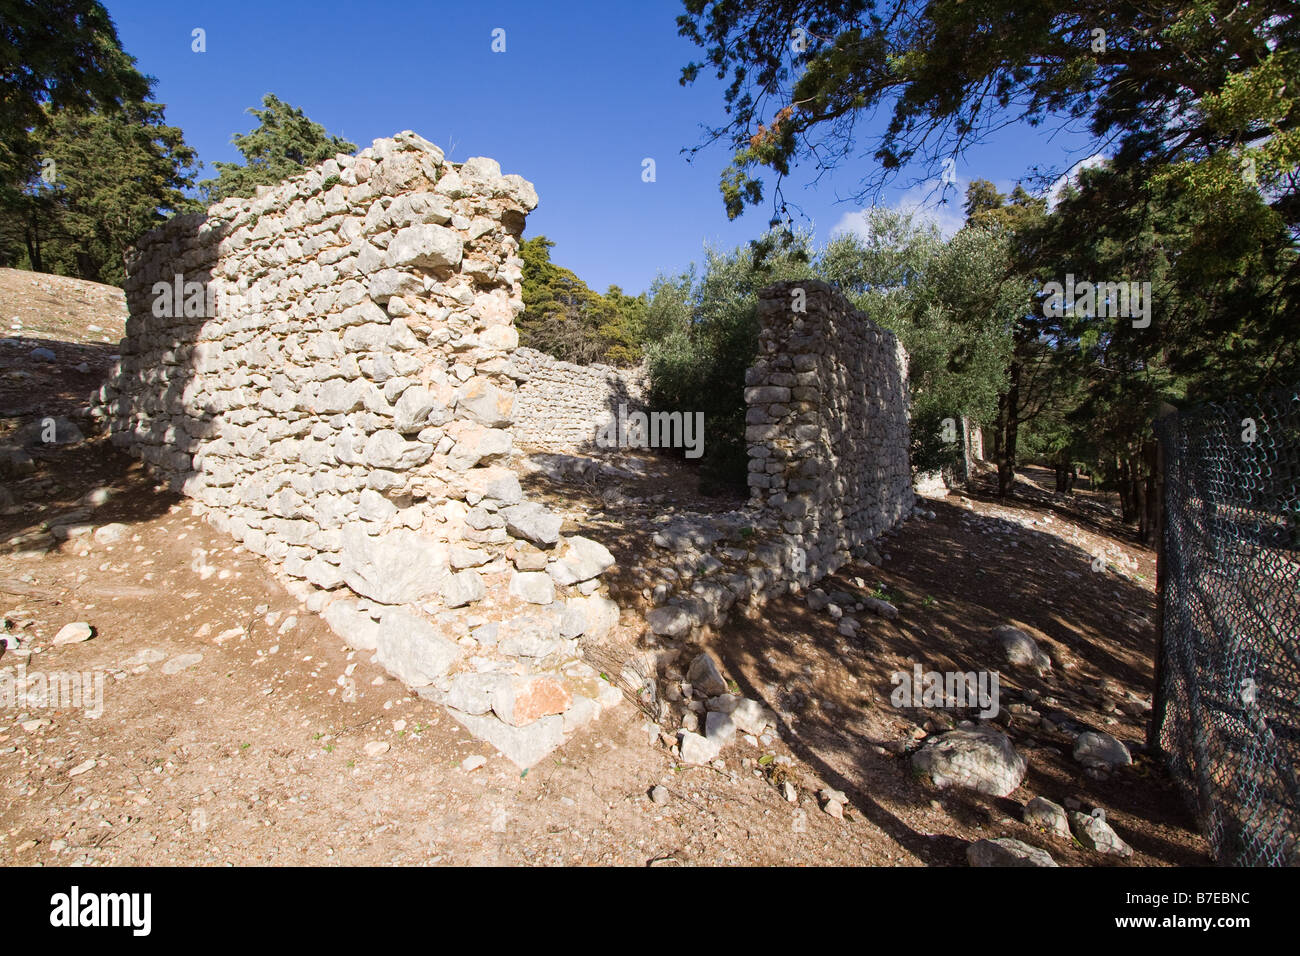 Remaining of the slaughterhouse structures in Sesimbra Castle, Setubal district, Portugal. Stock Photo